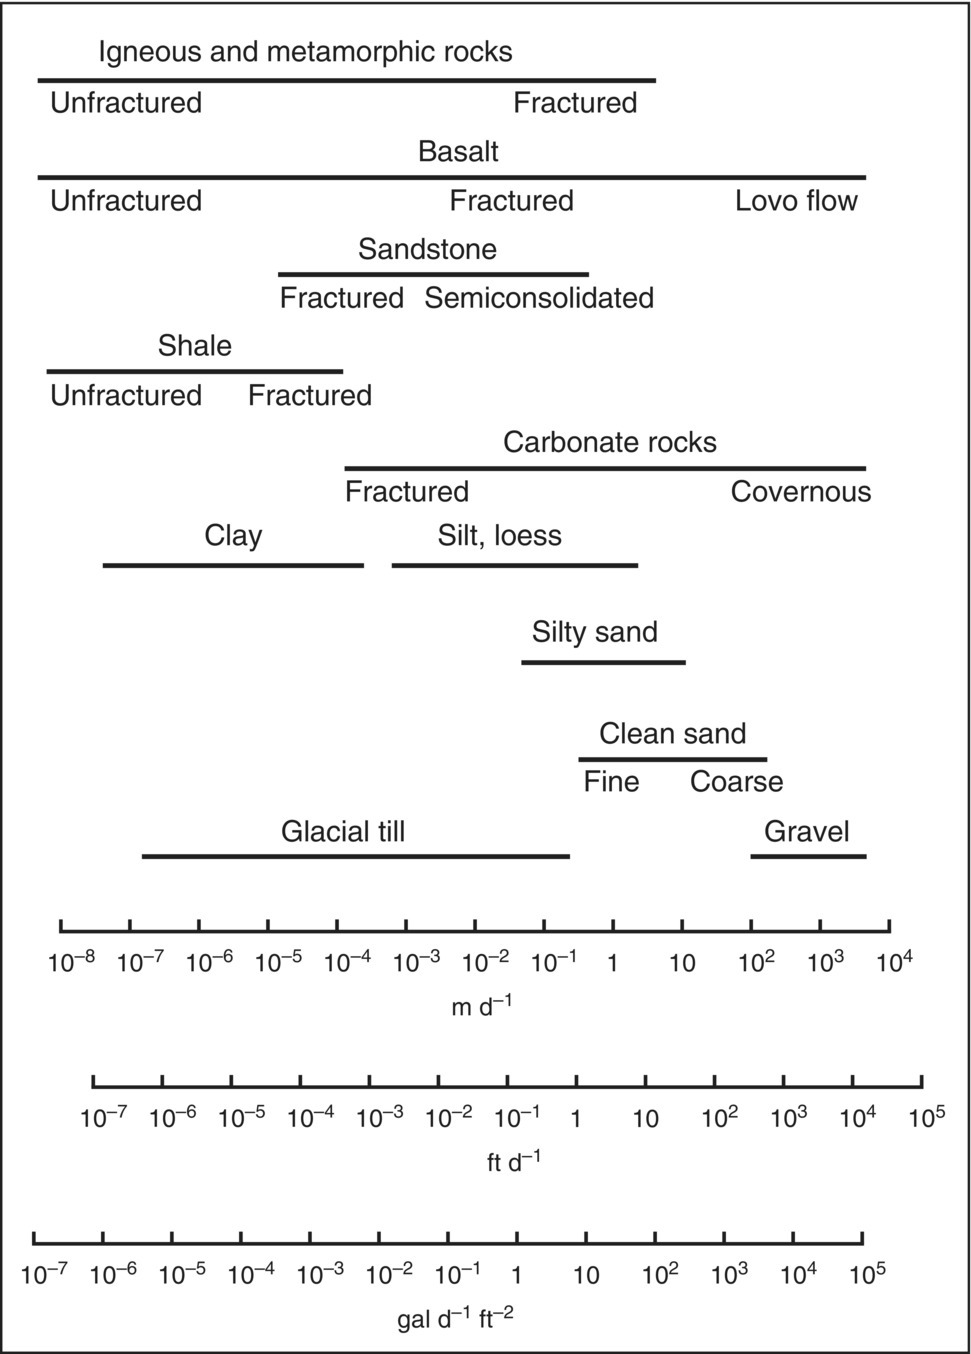 3 Bar scales in m (d–1), ft (d–1), and gal (d–1 ft–2) illustrating the size of various sediments with horizontal lines on top labeled igneous and metamorphic rocks, basalt, sandstone, shale, carbonate rocks, etc.